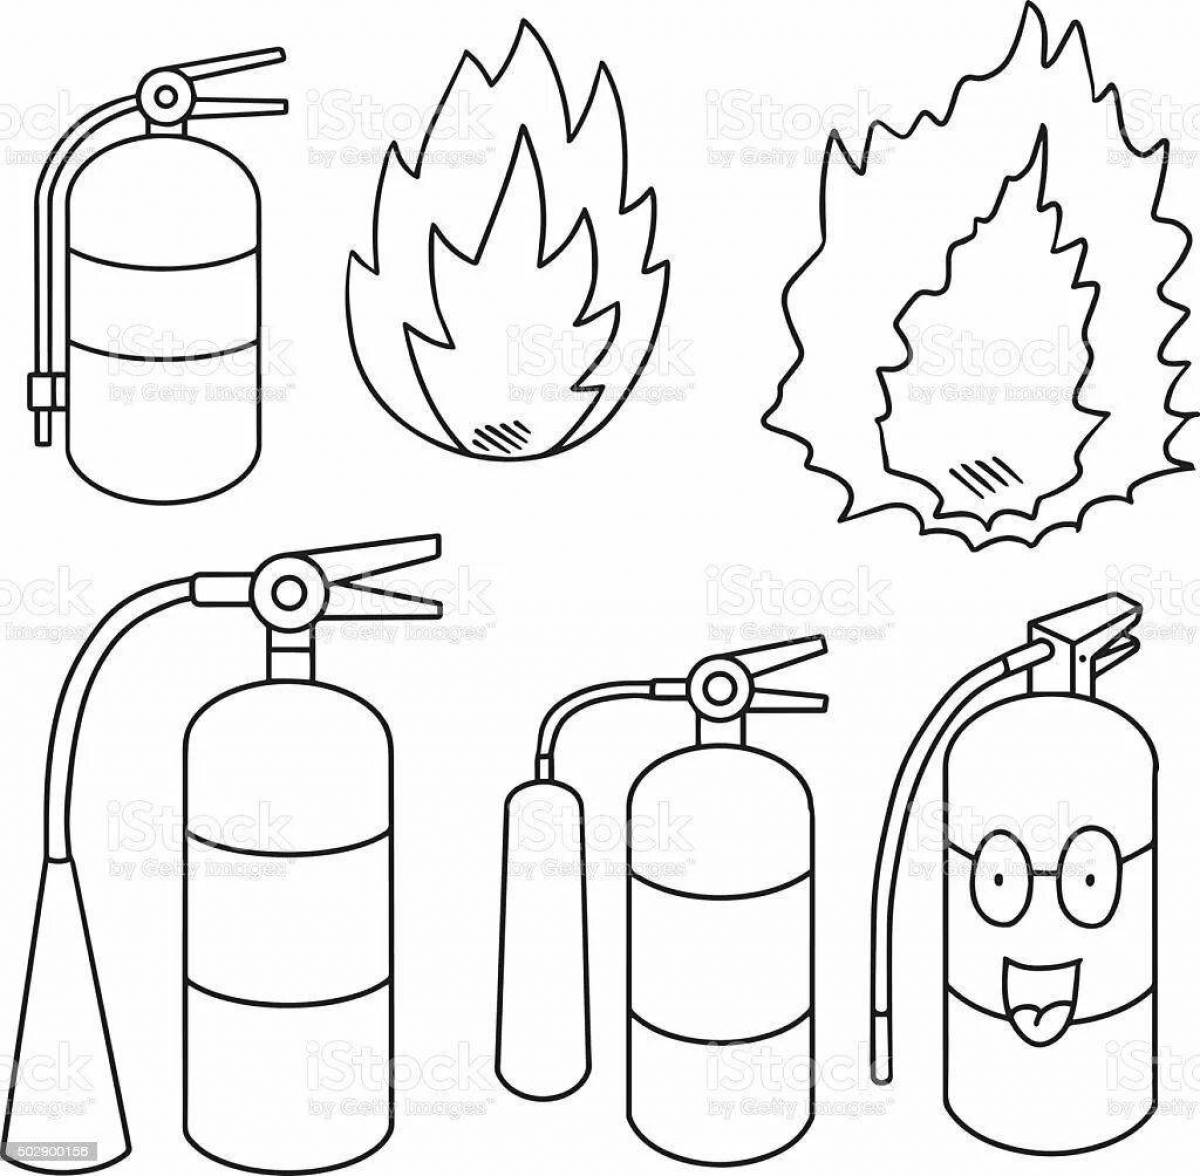 Fantastic fire shield coloring page